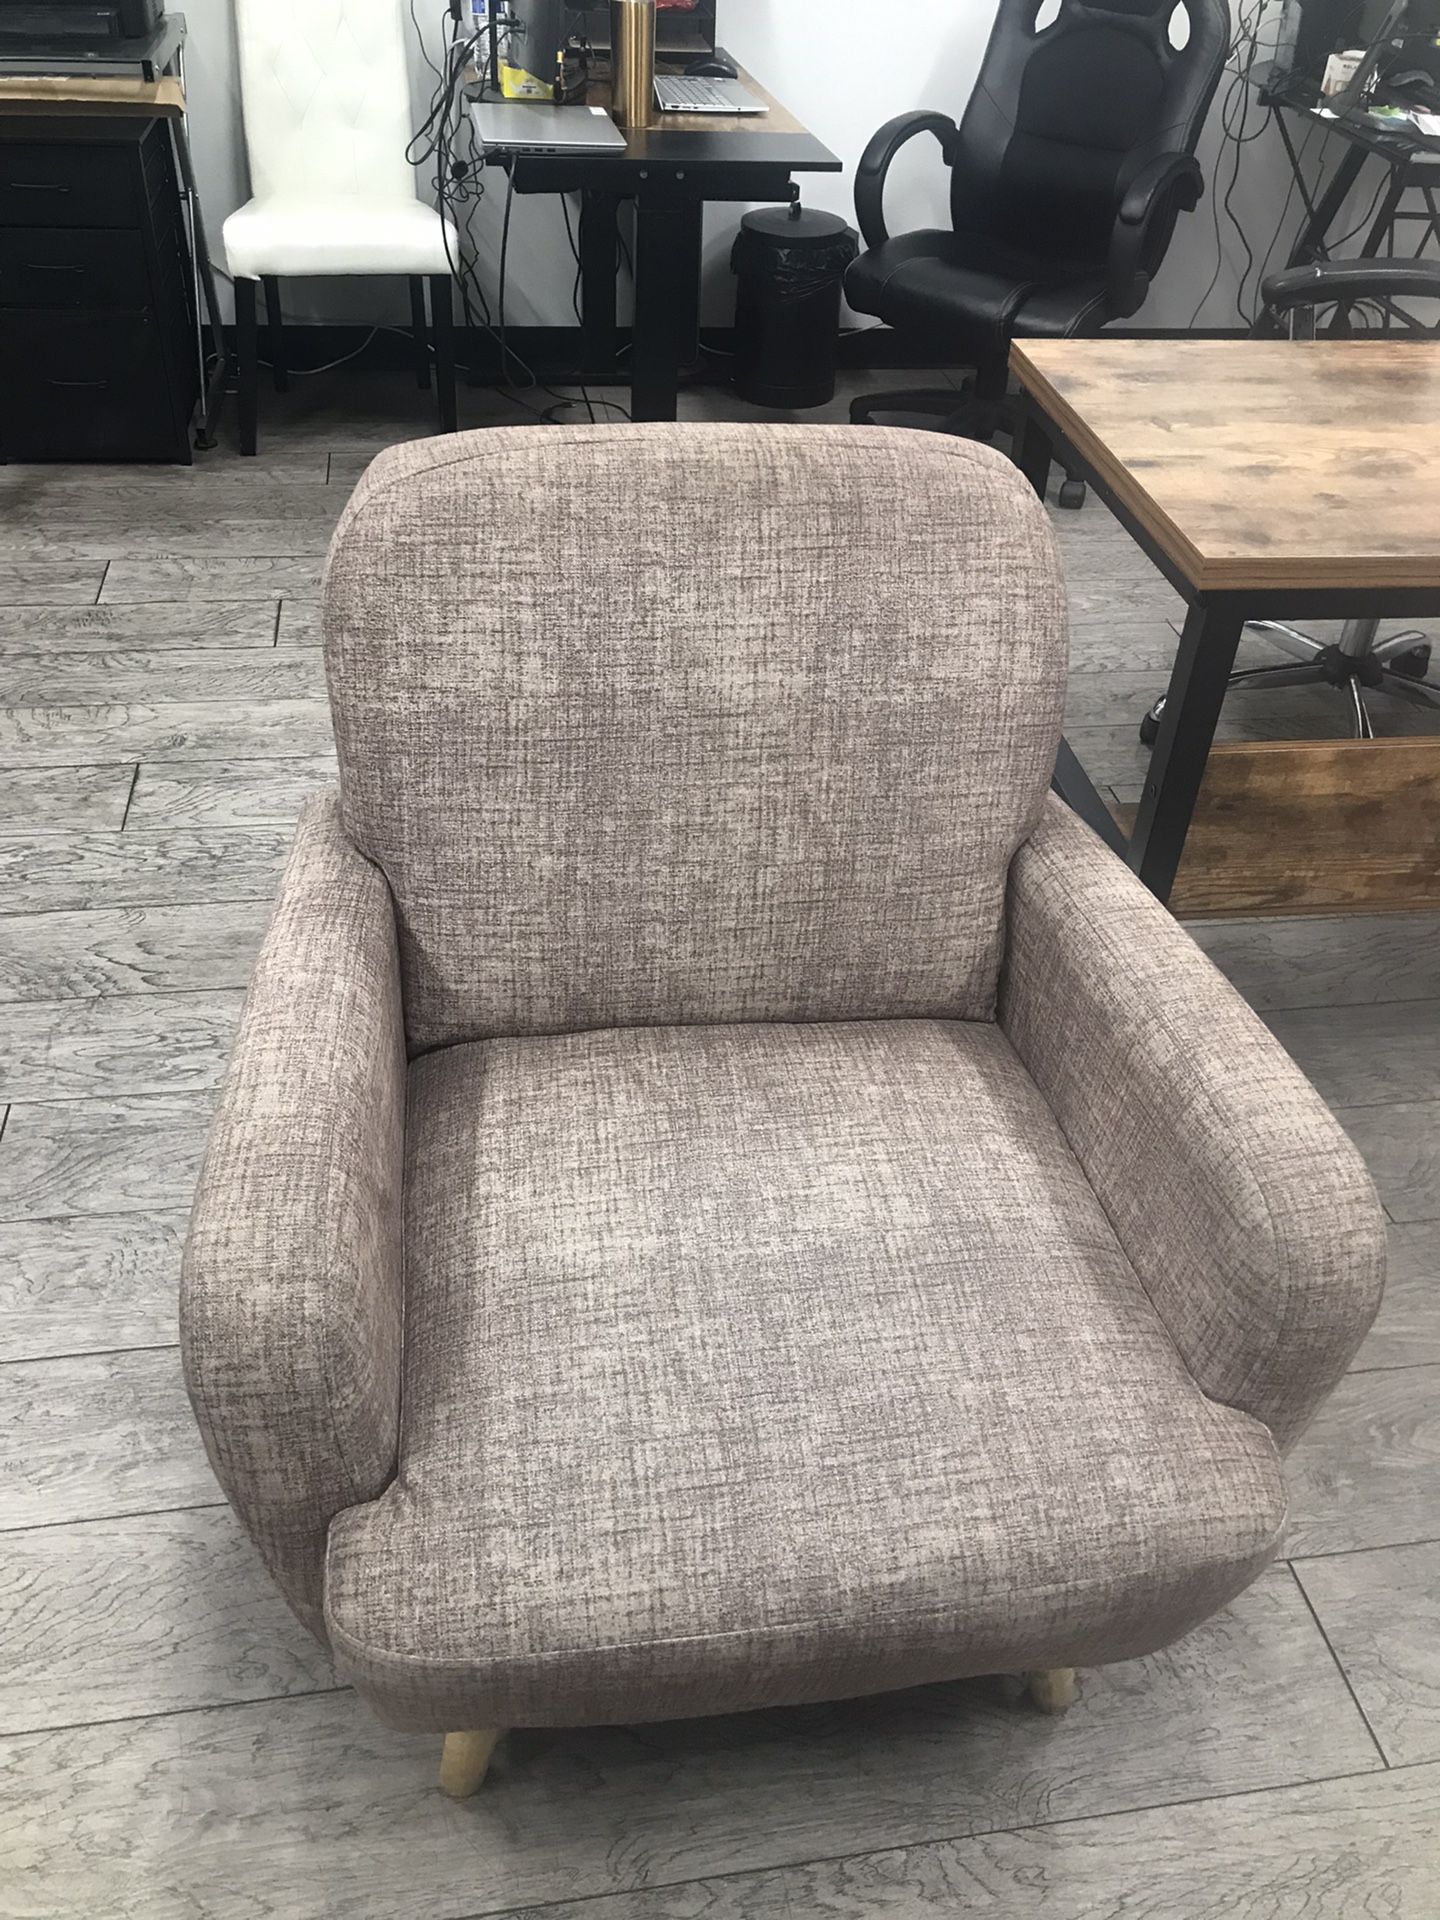 BRAND NEW CHAIR ACCENTS COLOR  BEIGE ( 3 CHAIR)